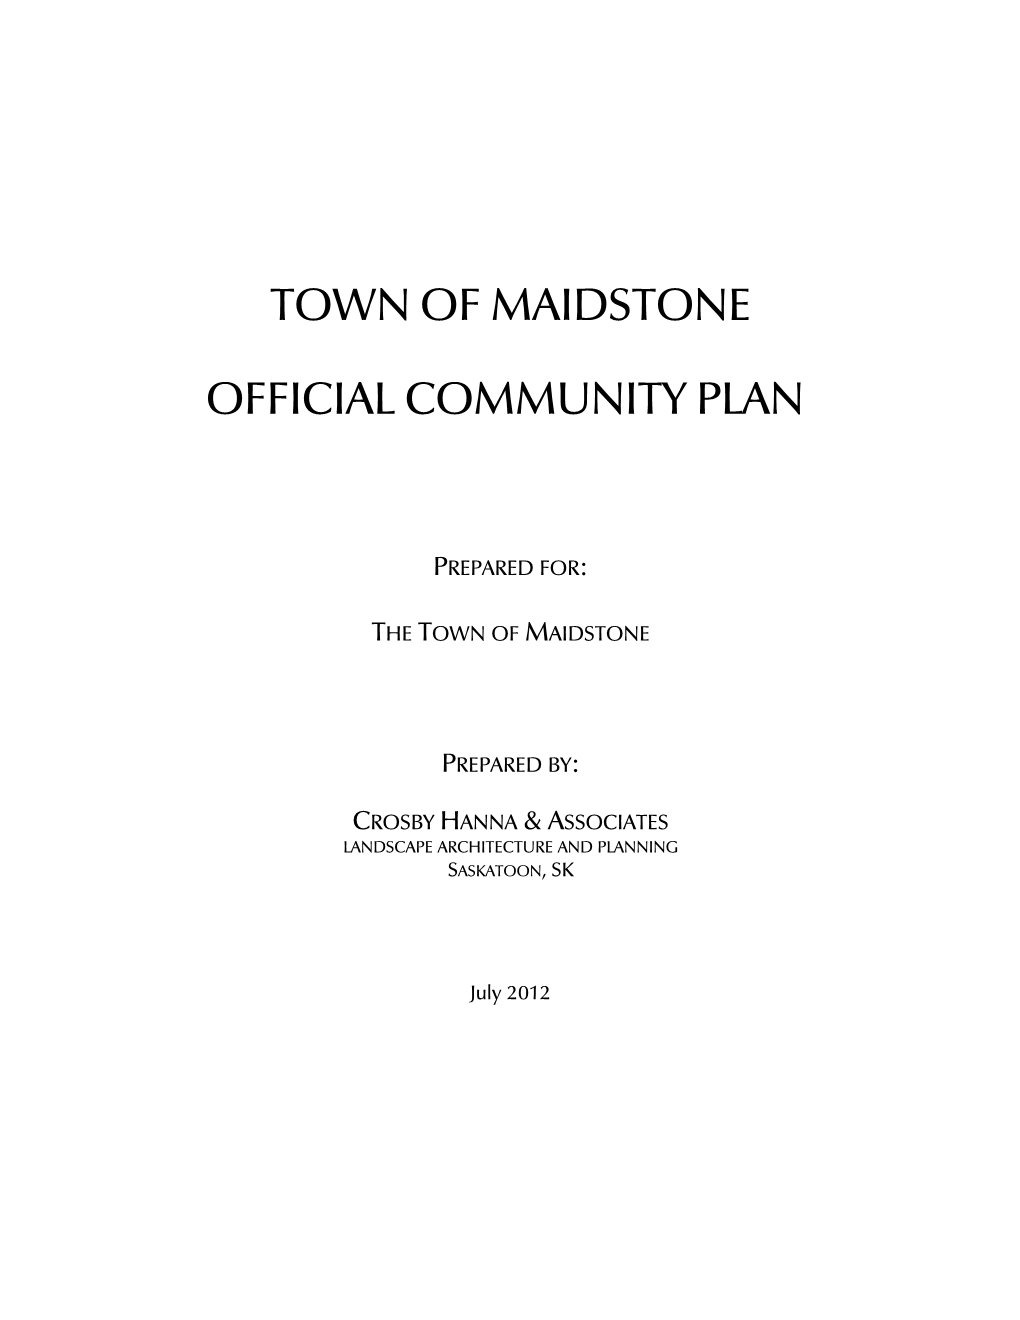 Town of Maidstone Official Community Plan, Identified As Schedule "A" to This Bylaw